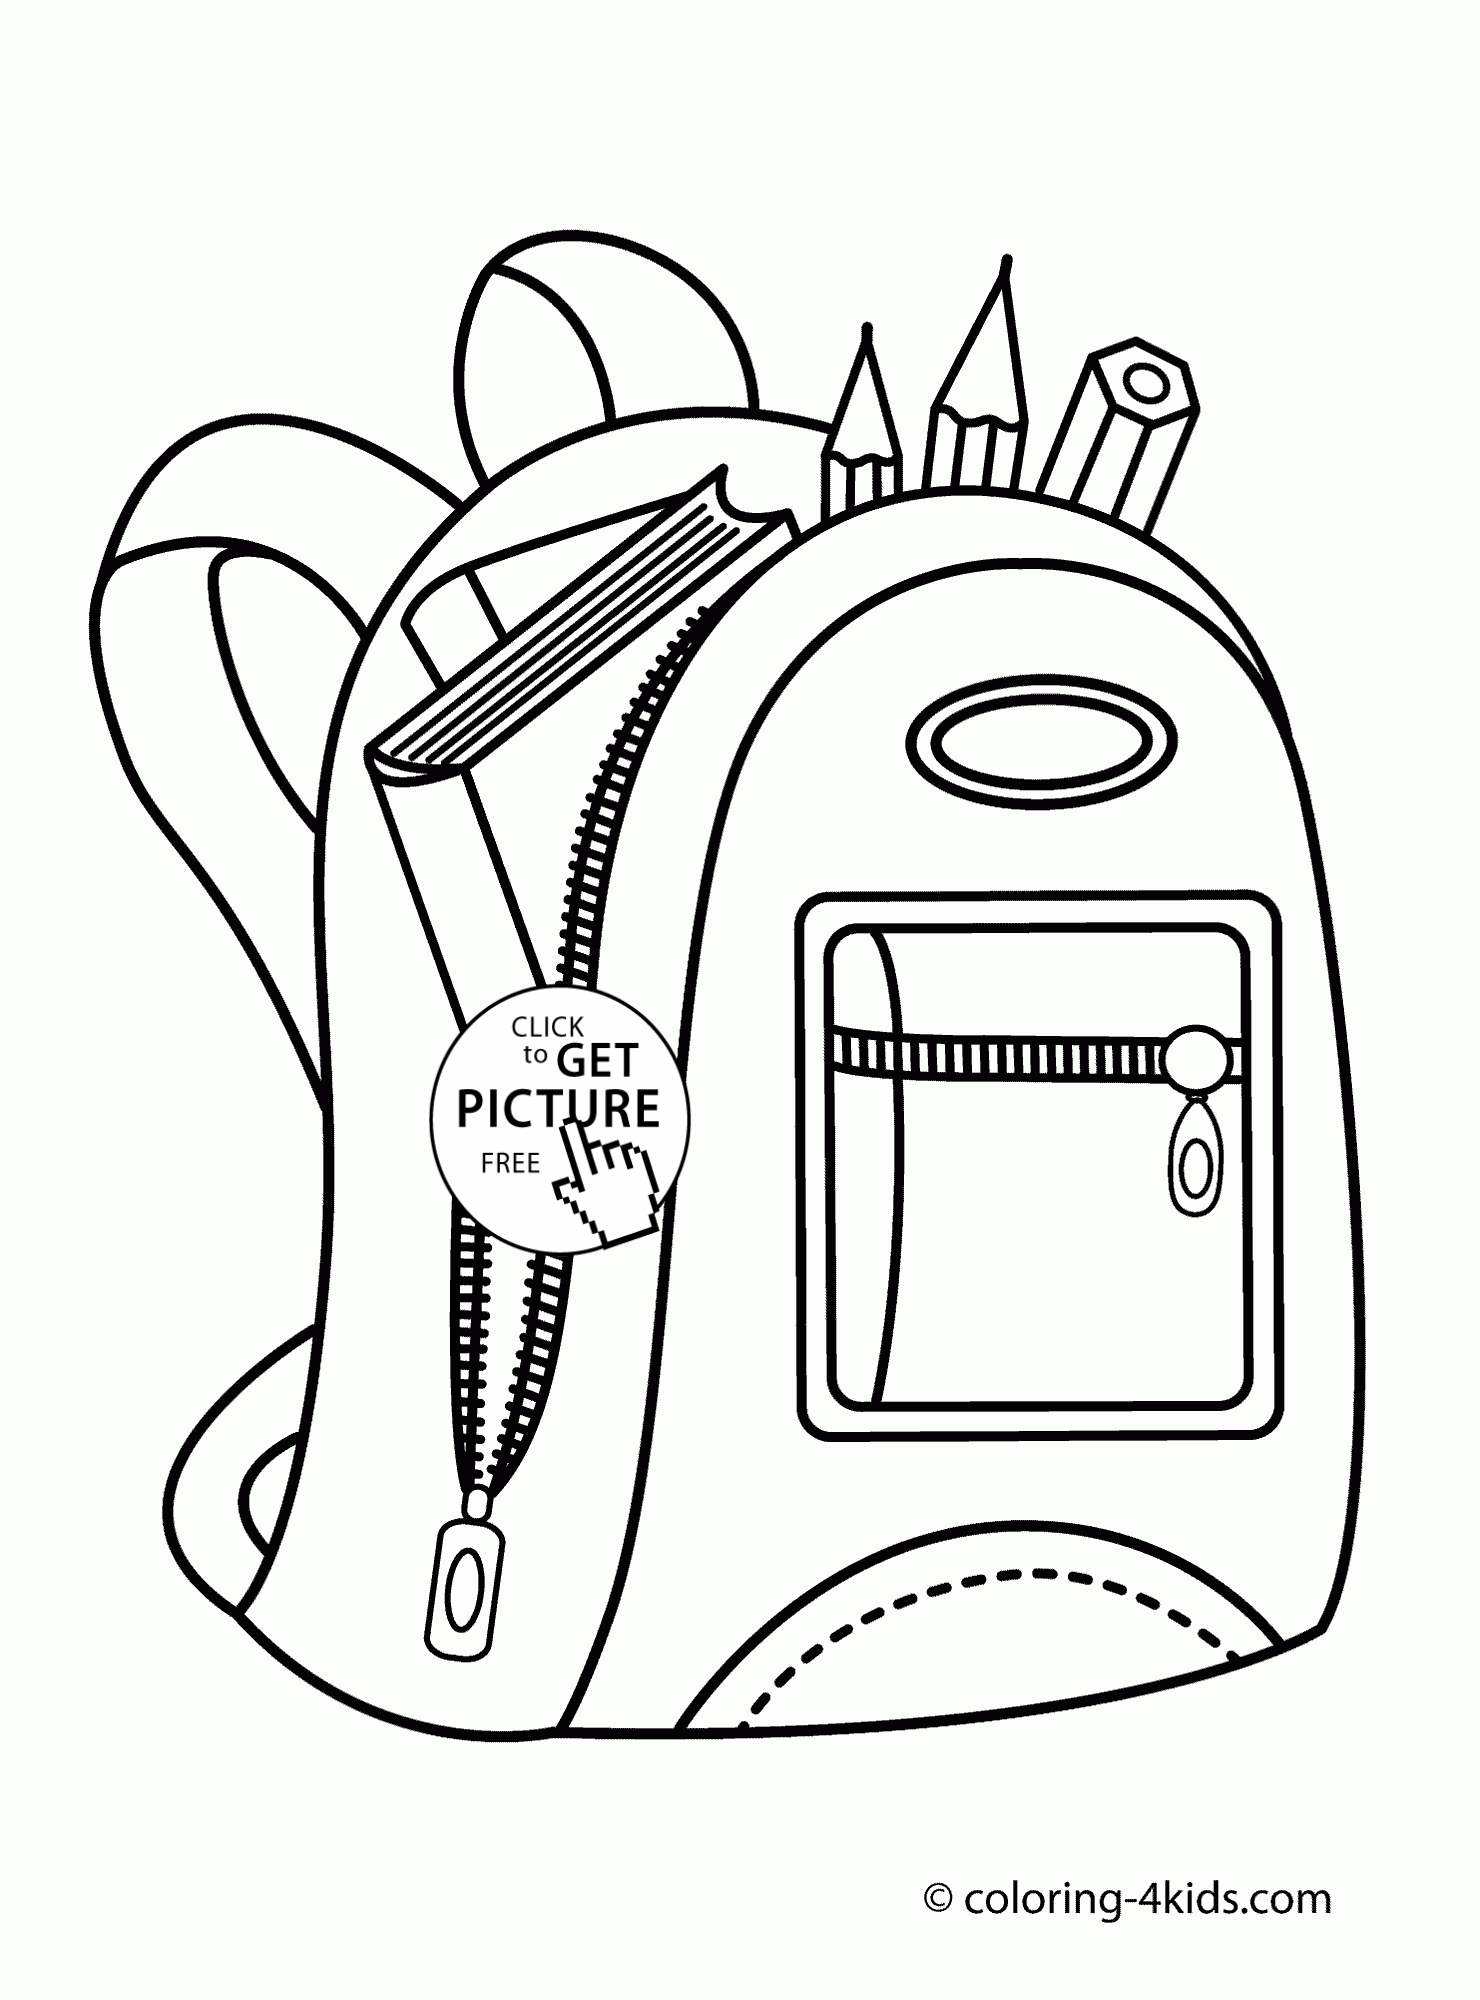 Backpack with school supplies loring page for kids back to school loring pages printables freâ school loring pages loring pages for kids loring pages